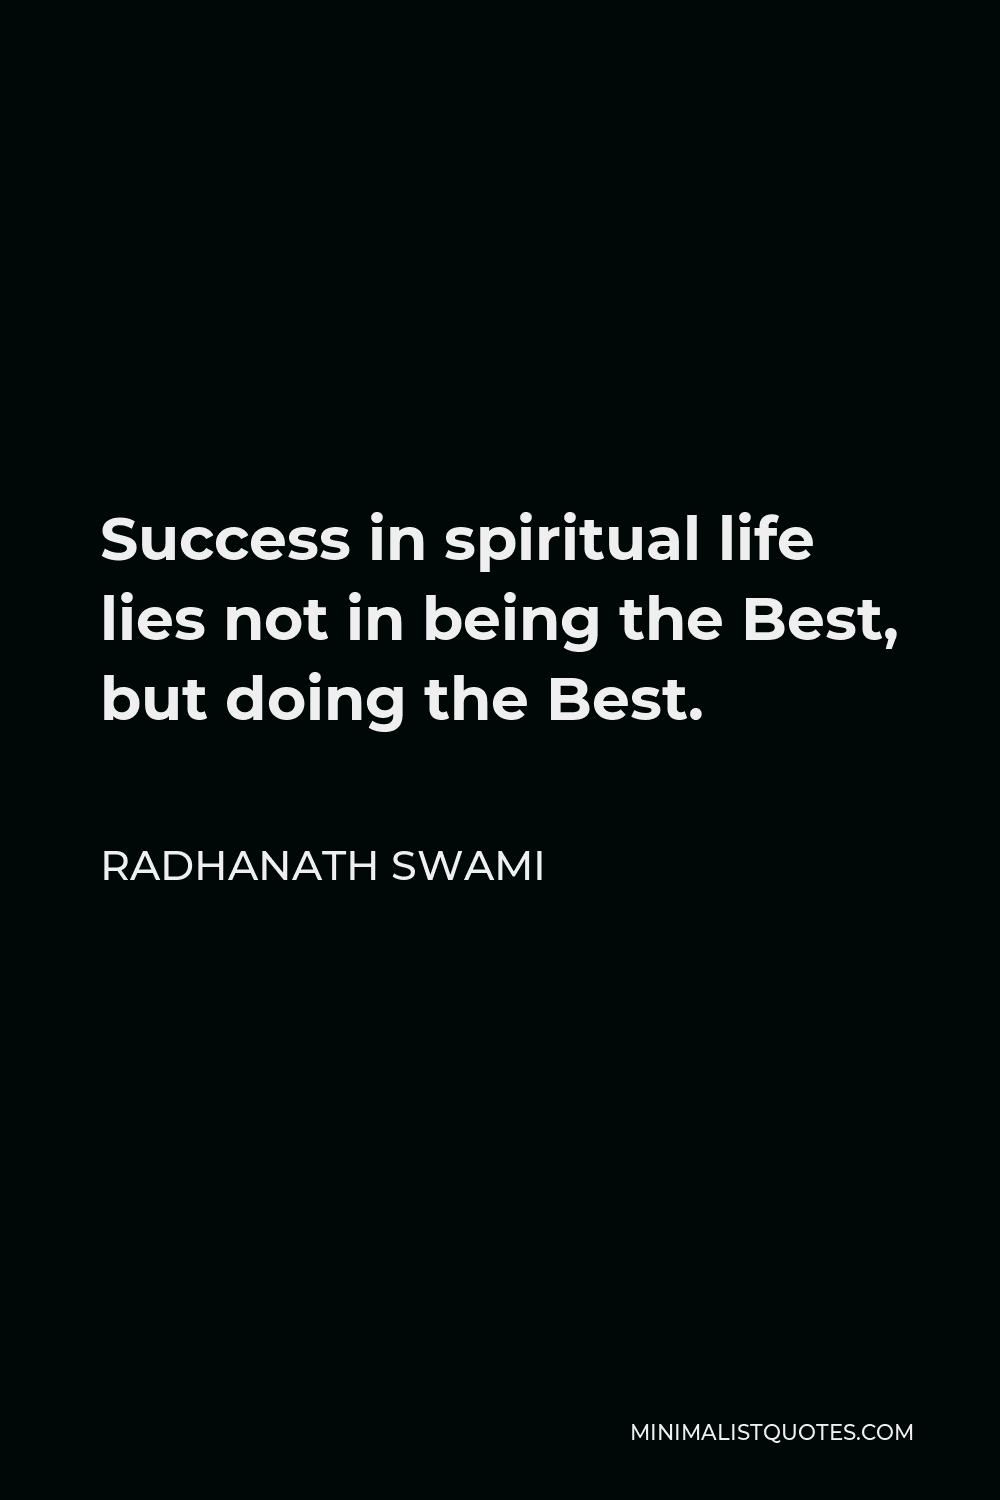 Radhanath Swami Quote - Success in spiritual life lies not in being the Best, but doing the Best.